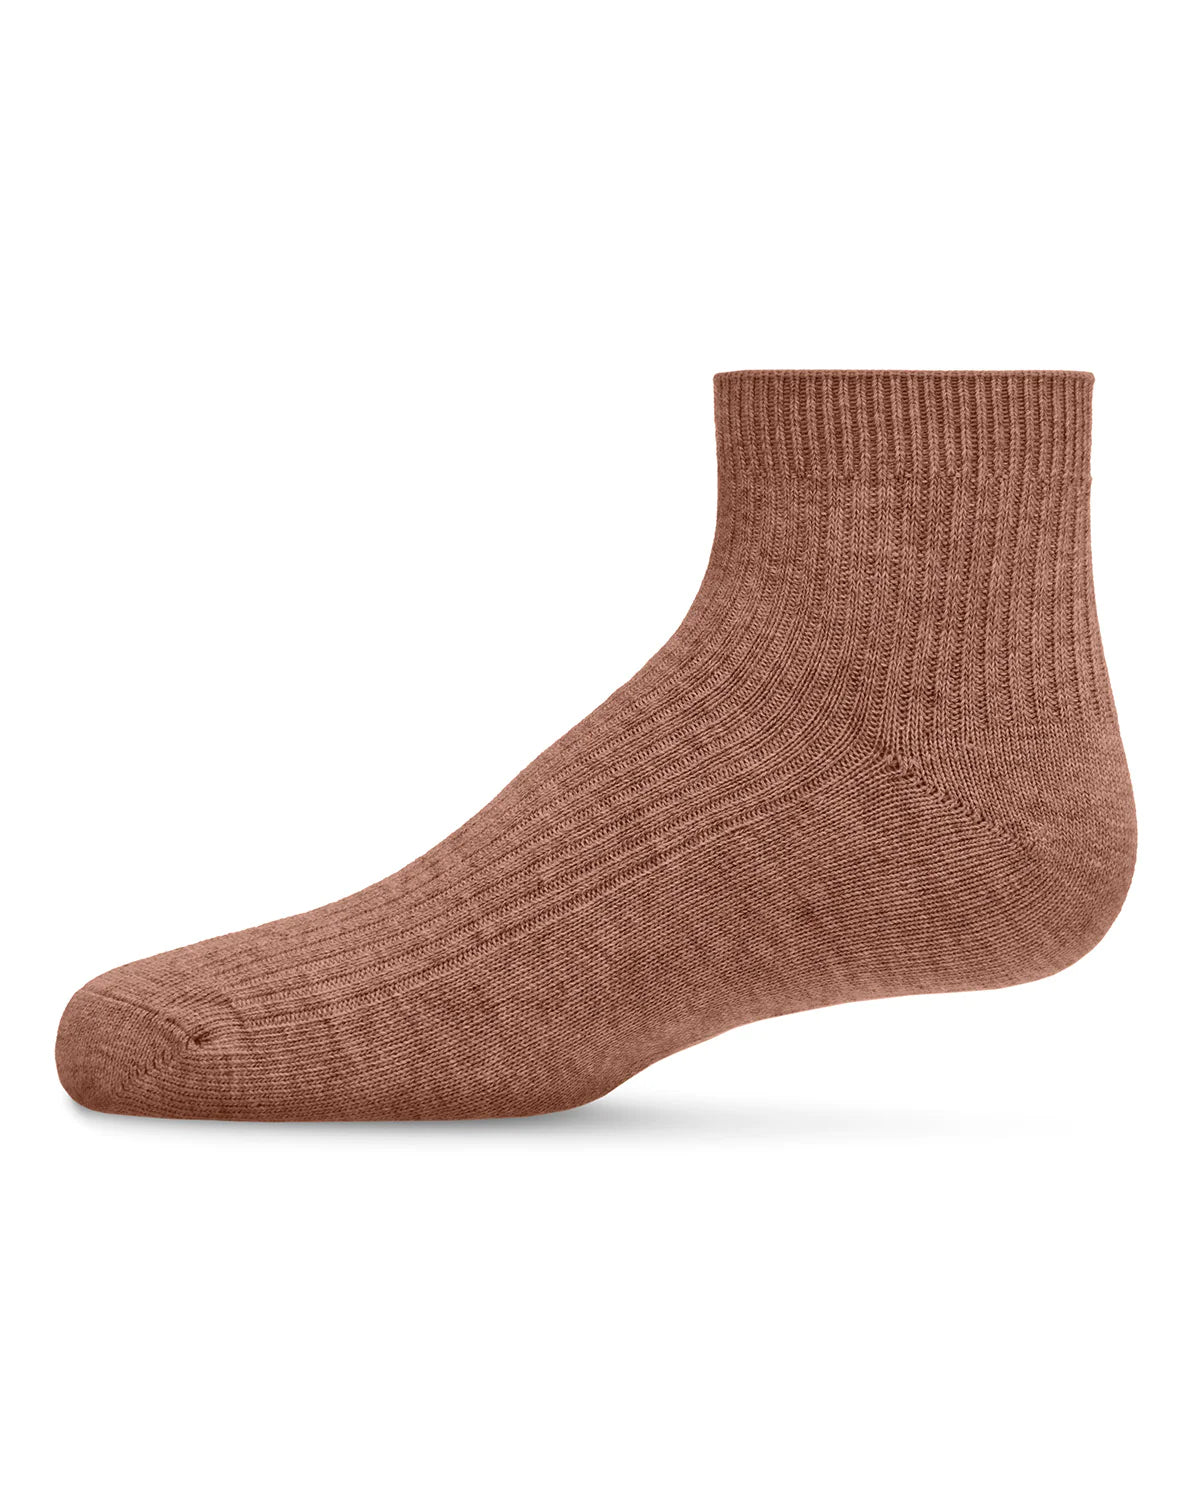 Toasted Almond Thin Ribbed Cotton Kids Anklet Sock